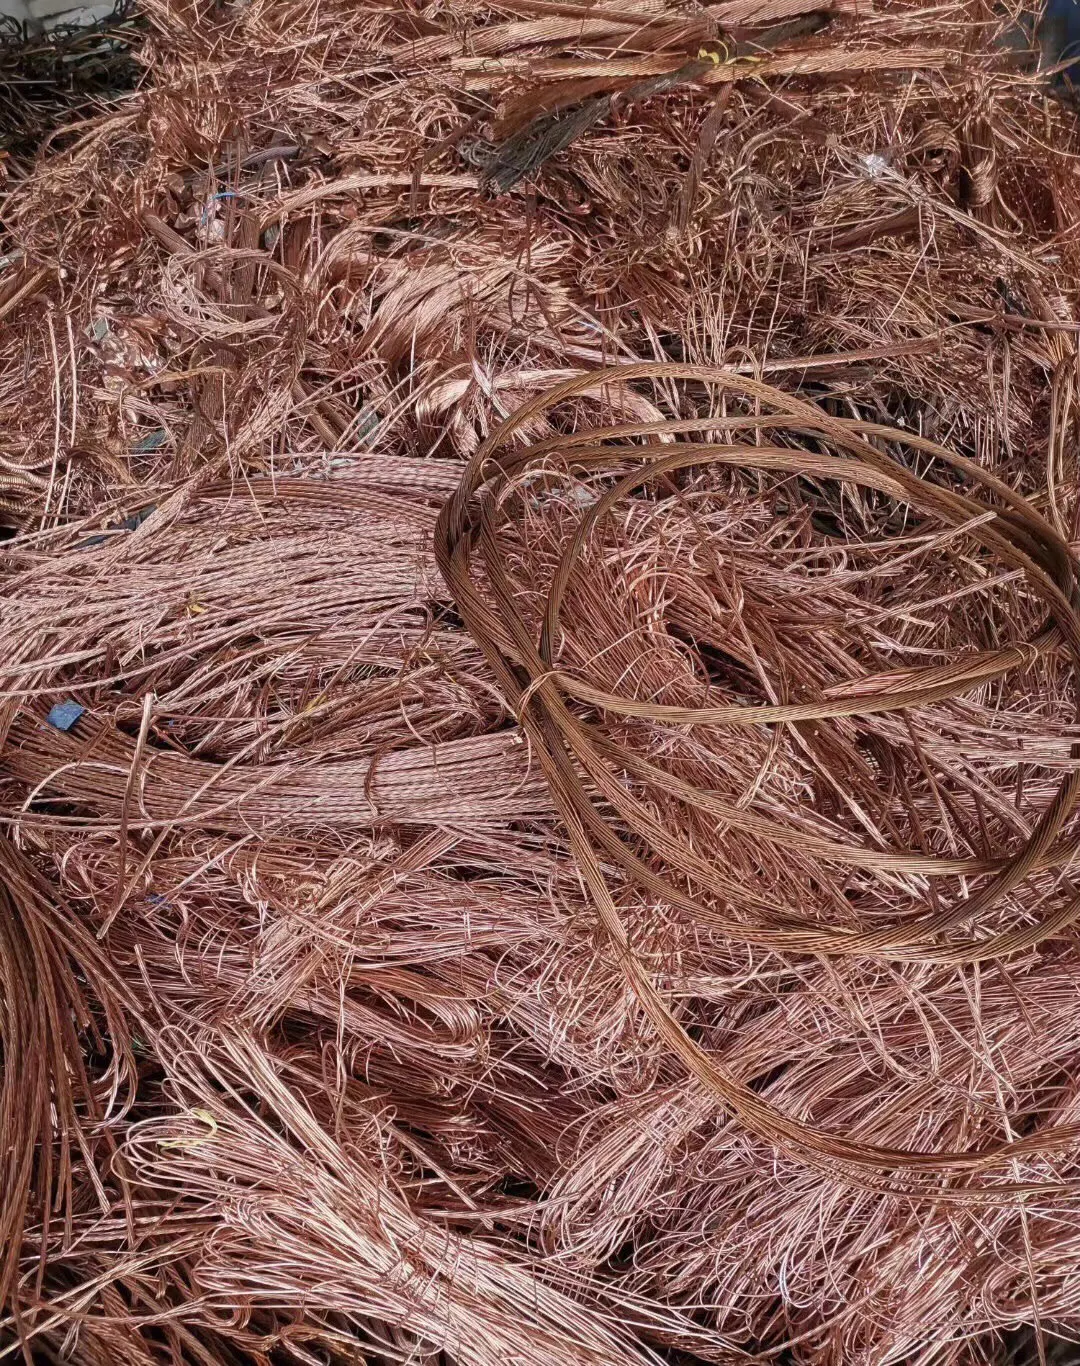 Cheap scrap for recycling  Copper wire /rod/ pipe  high purity 99.9%